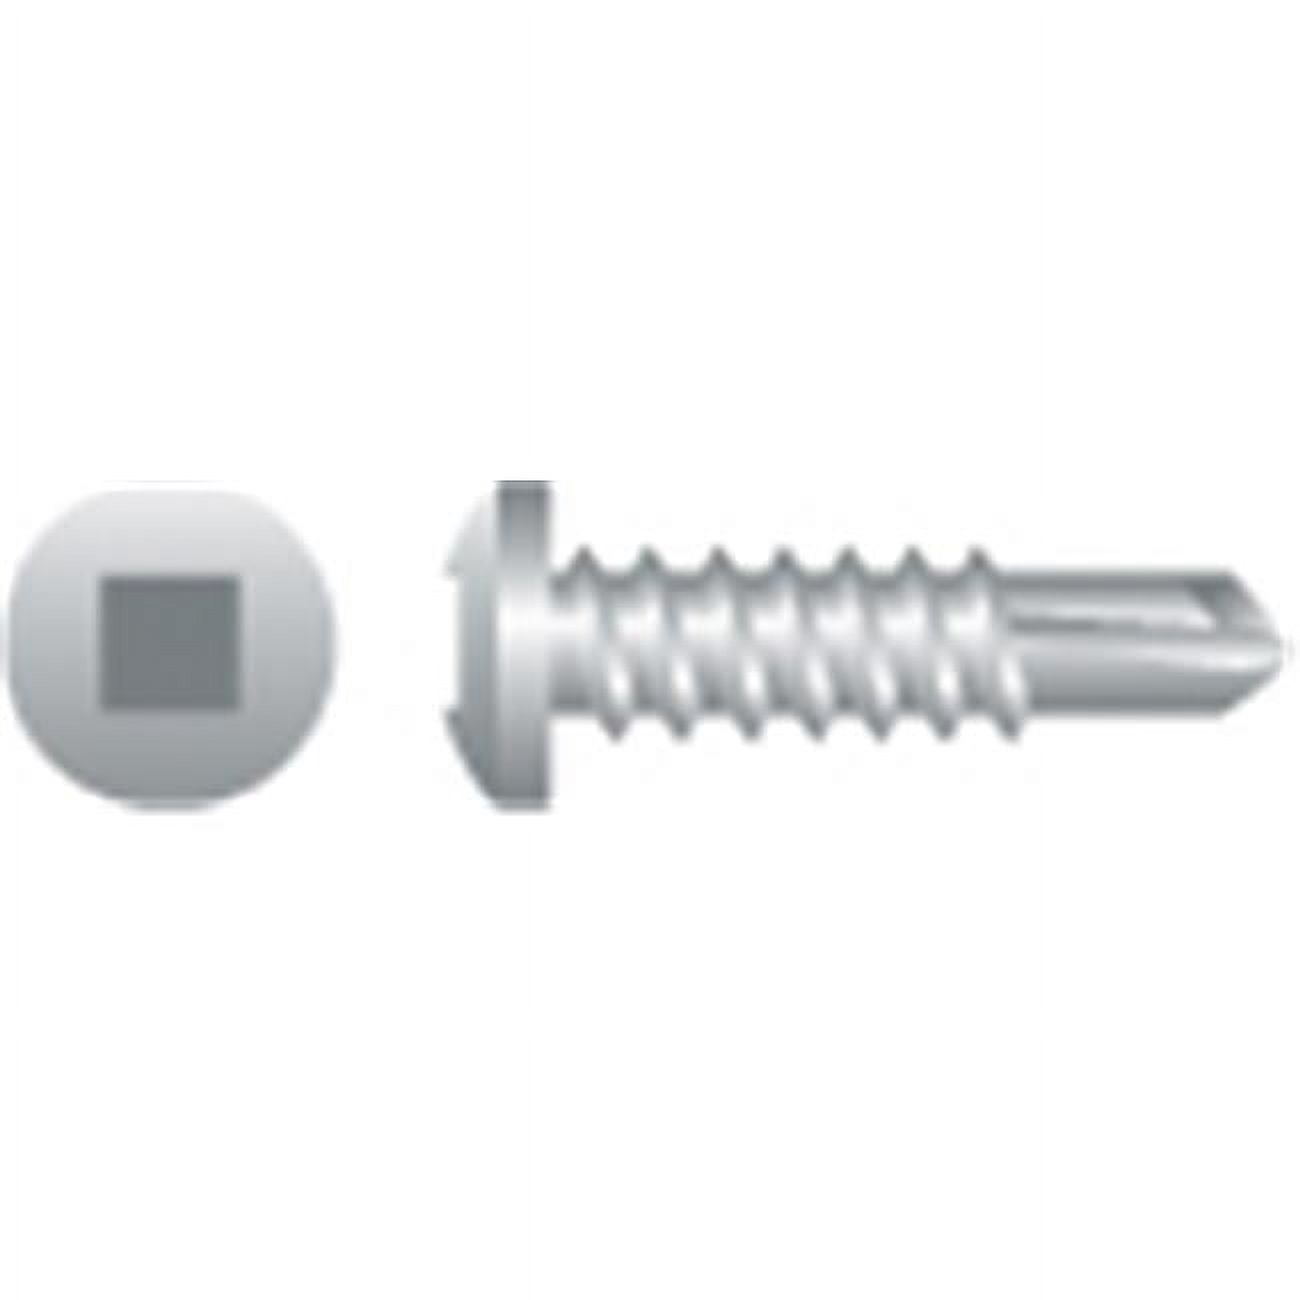 Strong-Point P106Q 10-16 x 0.75 in. Square Drive Pan Head Screws  Zinc Plated  Box of 8 000 - image 1 of 1